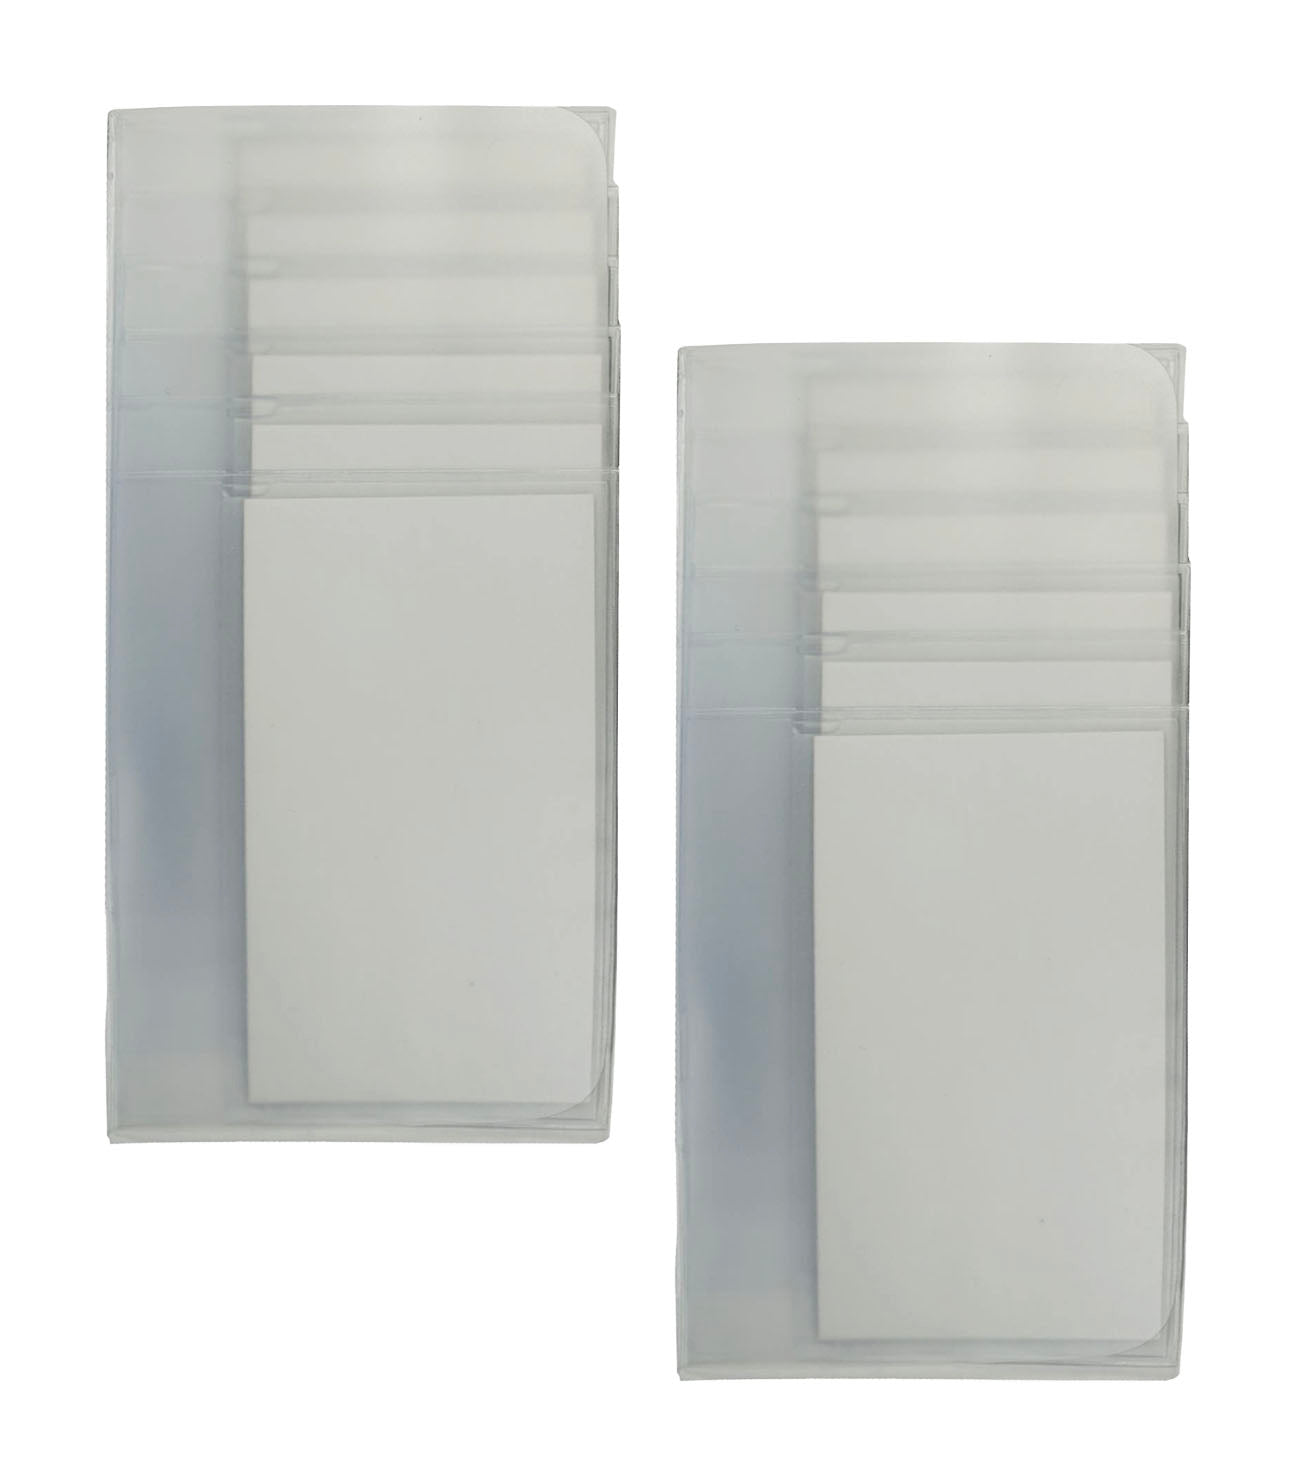 Sets of 2 Heavy Duty Vinyl Plastic for Secretary Checkbook Cover long Wallet Replacement Inserts